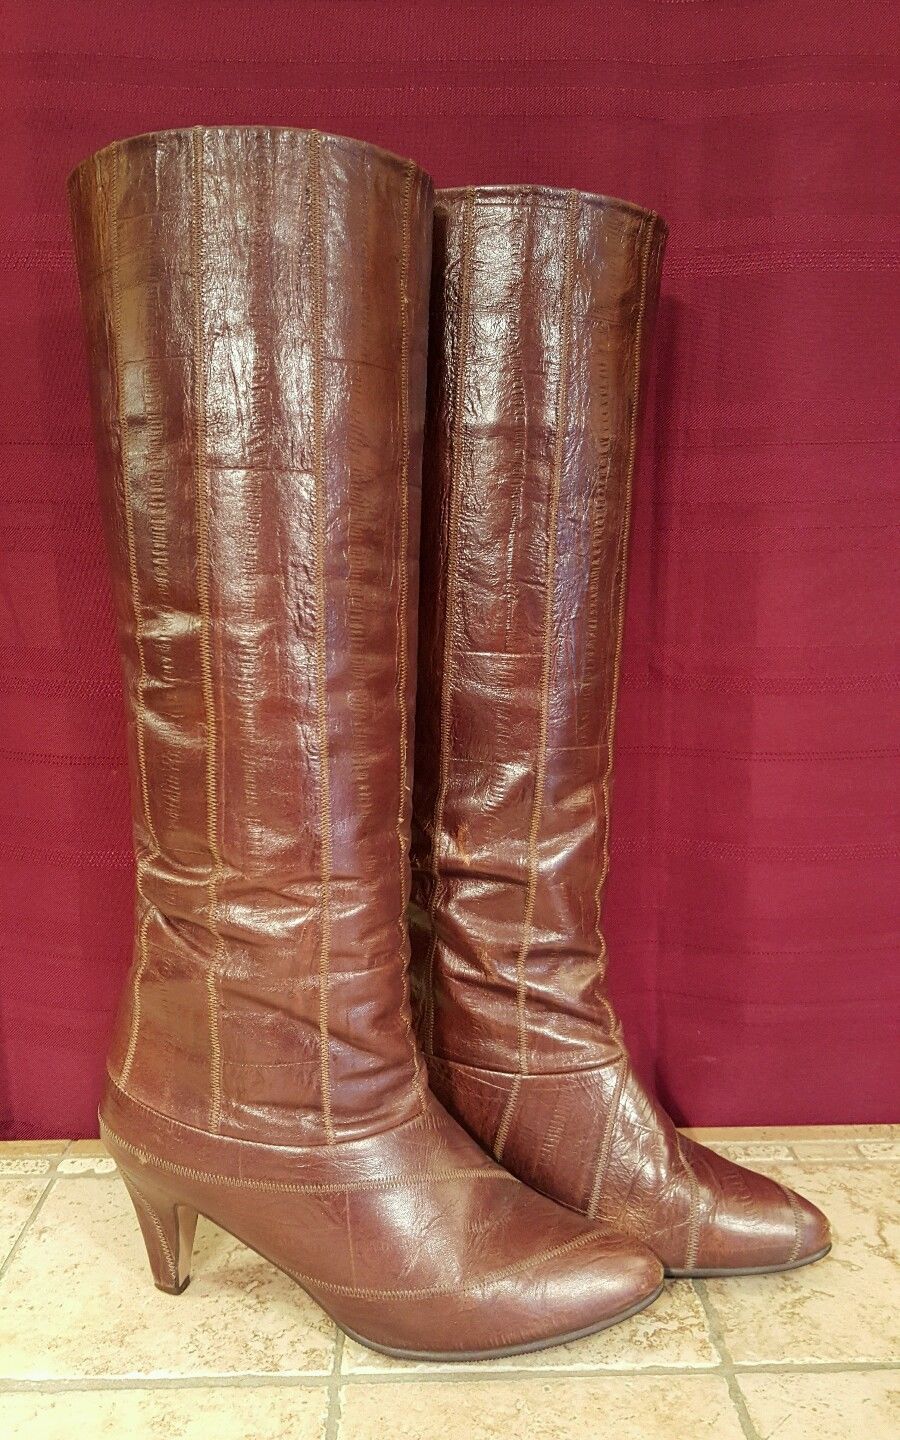 Women's Shoes — Vintage Joyce Knee High Riding Boots, 6M, Brown...